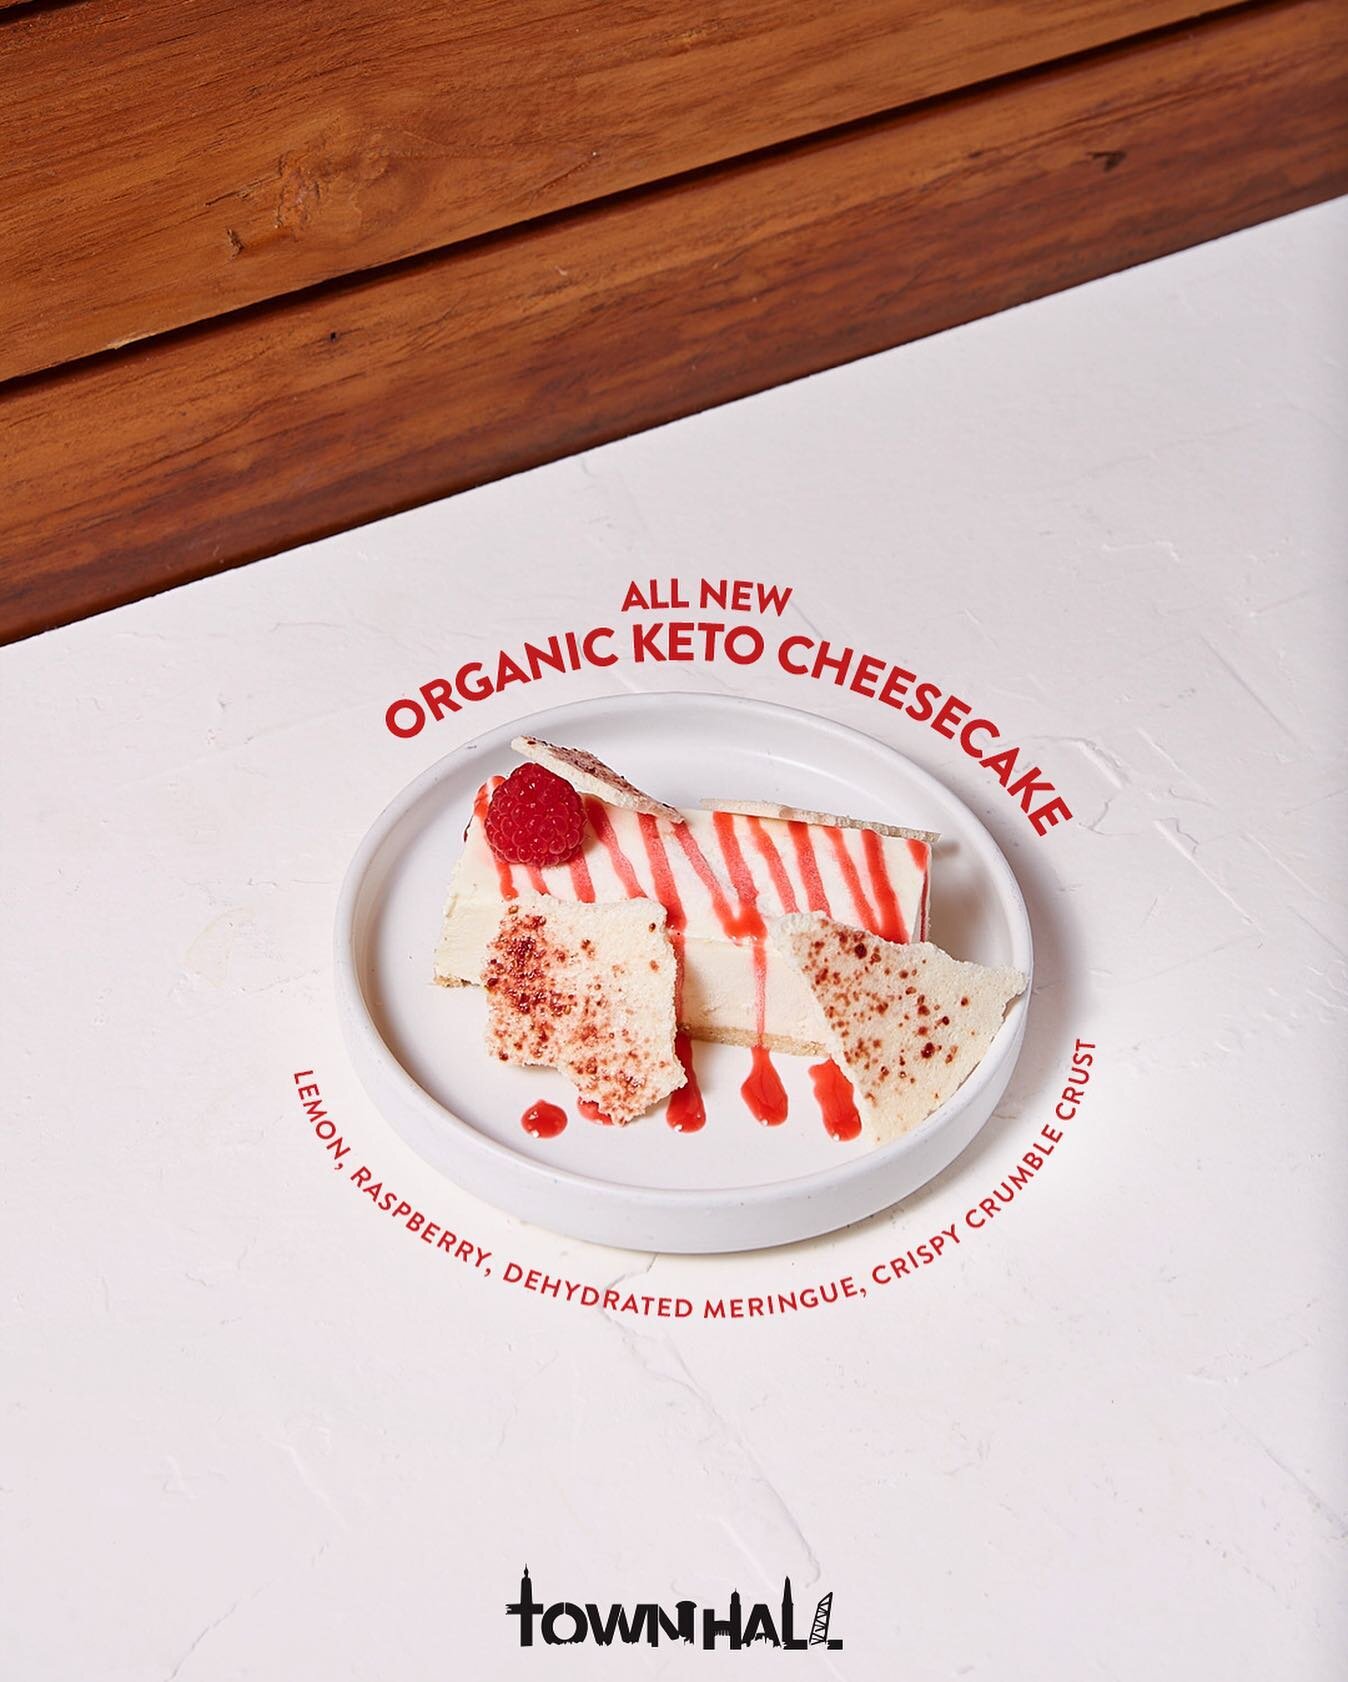 Our new keto cheesecake is here! All organic, zero sugar and tastes amazing!! Come by to taste test and let us know what you think! #TownHallorNowhere